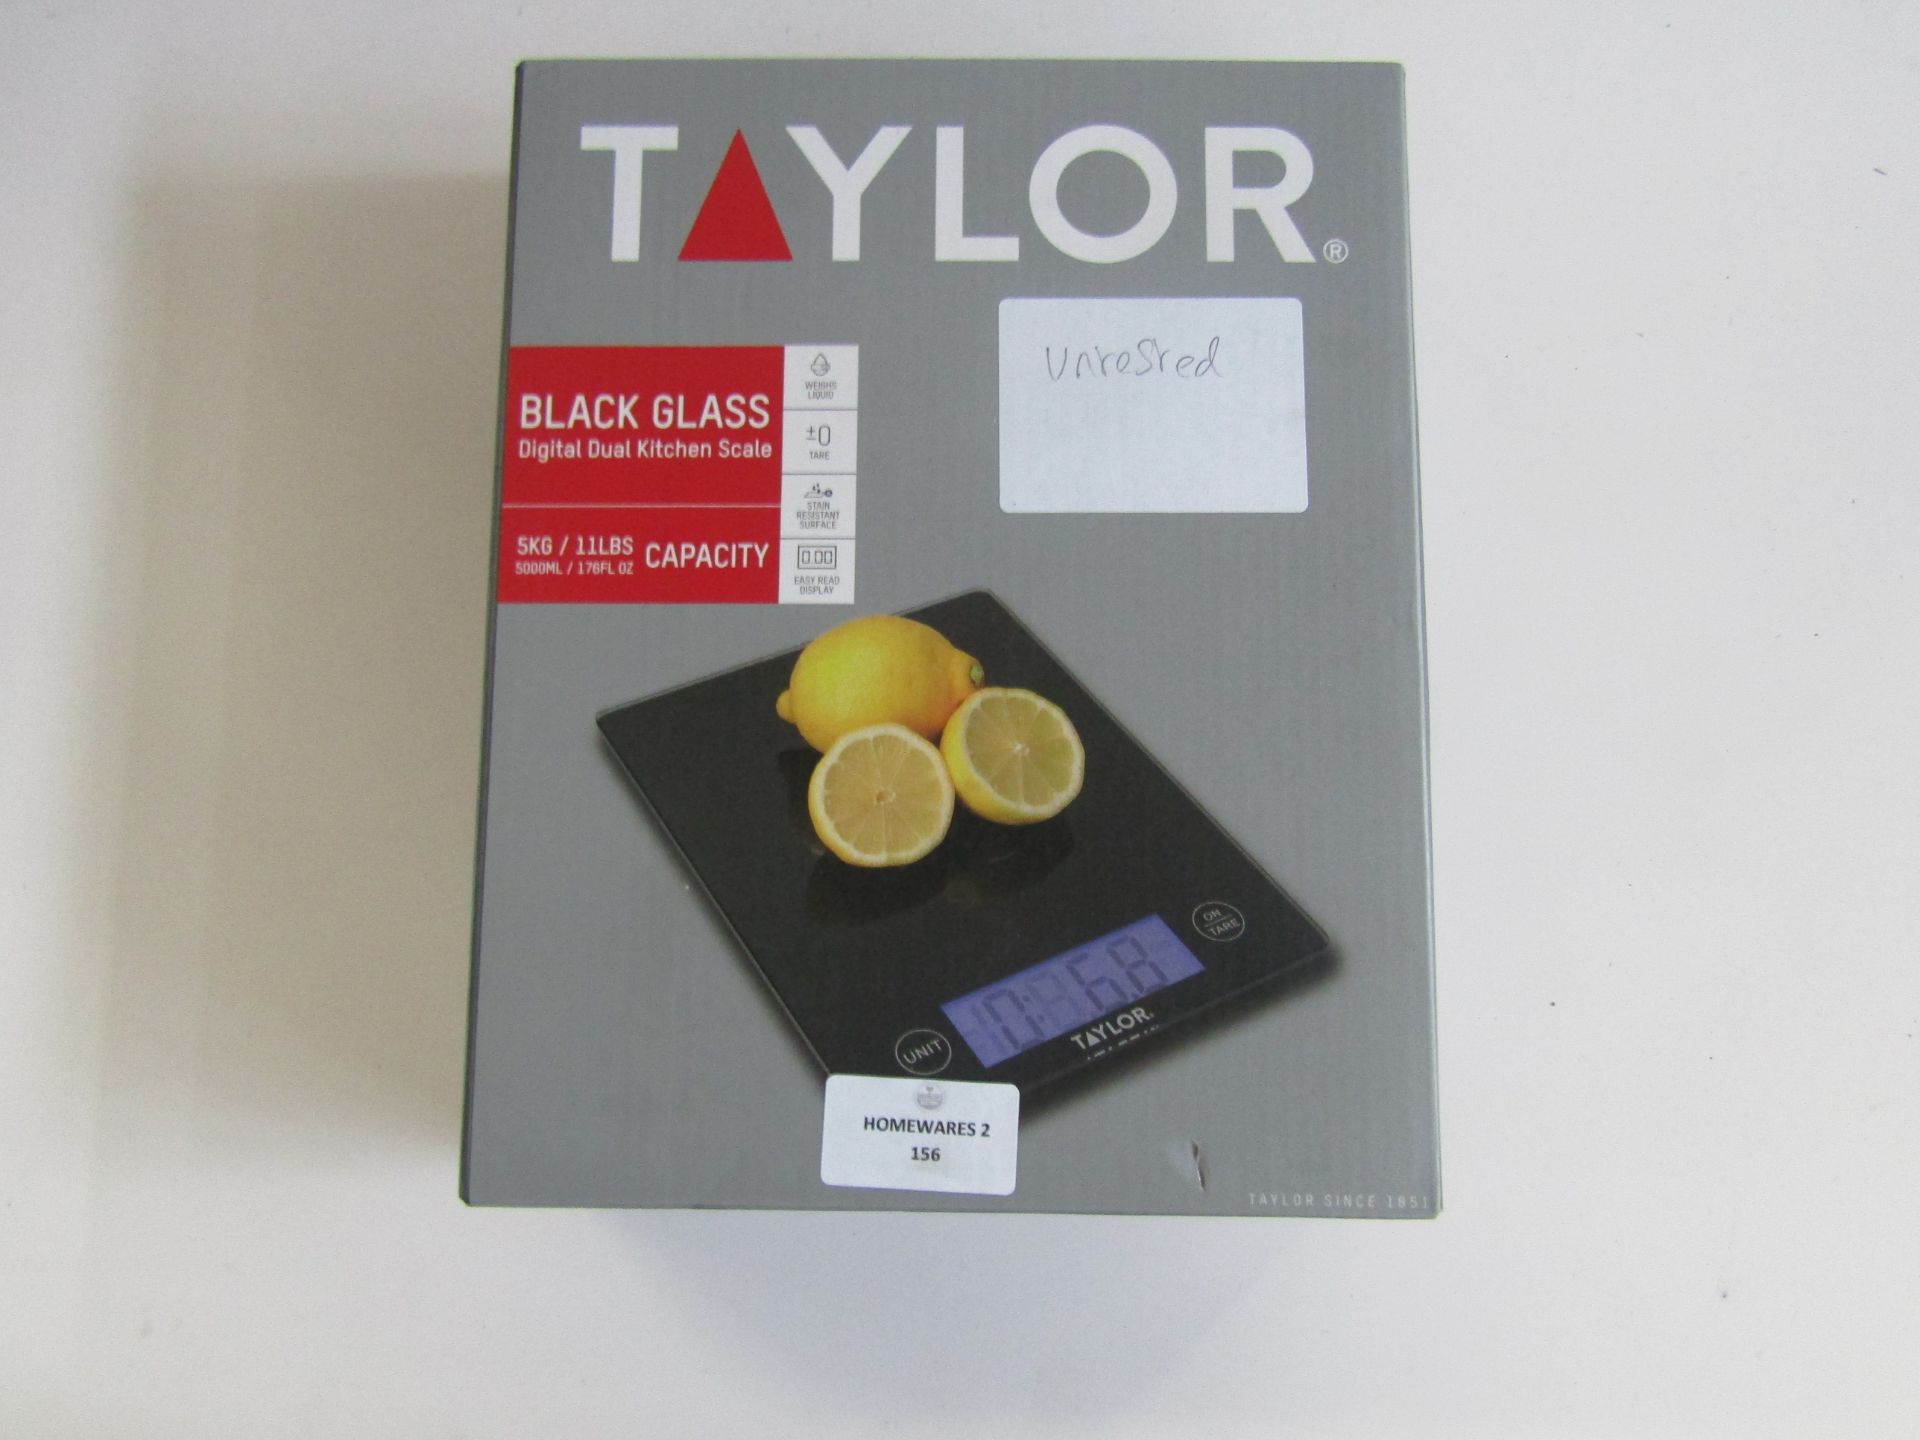 Taylor - Digital Dual Kitchen Scale 5kg Capacity - Untested & Boxed.